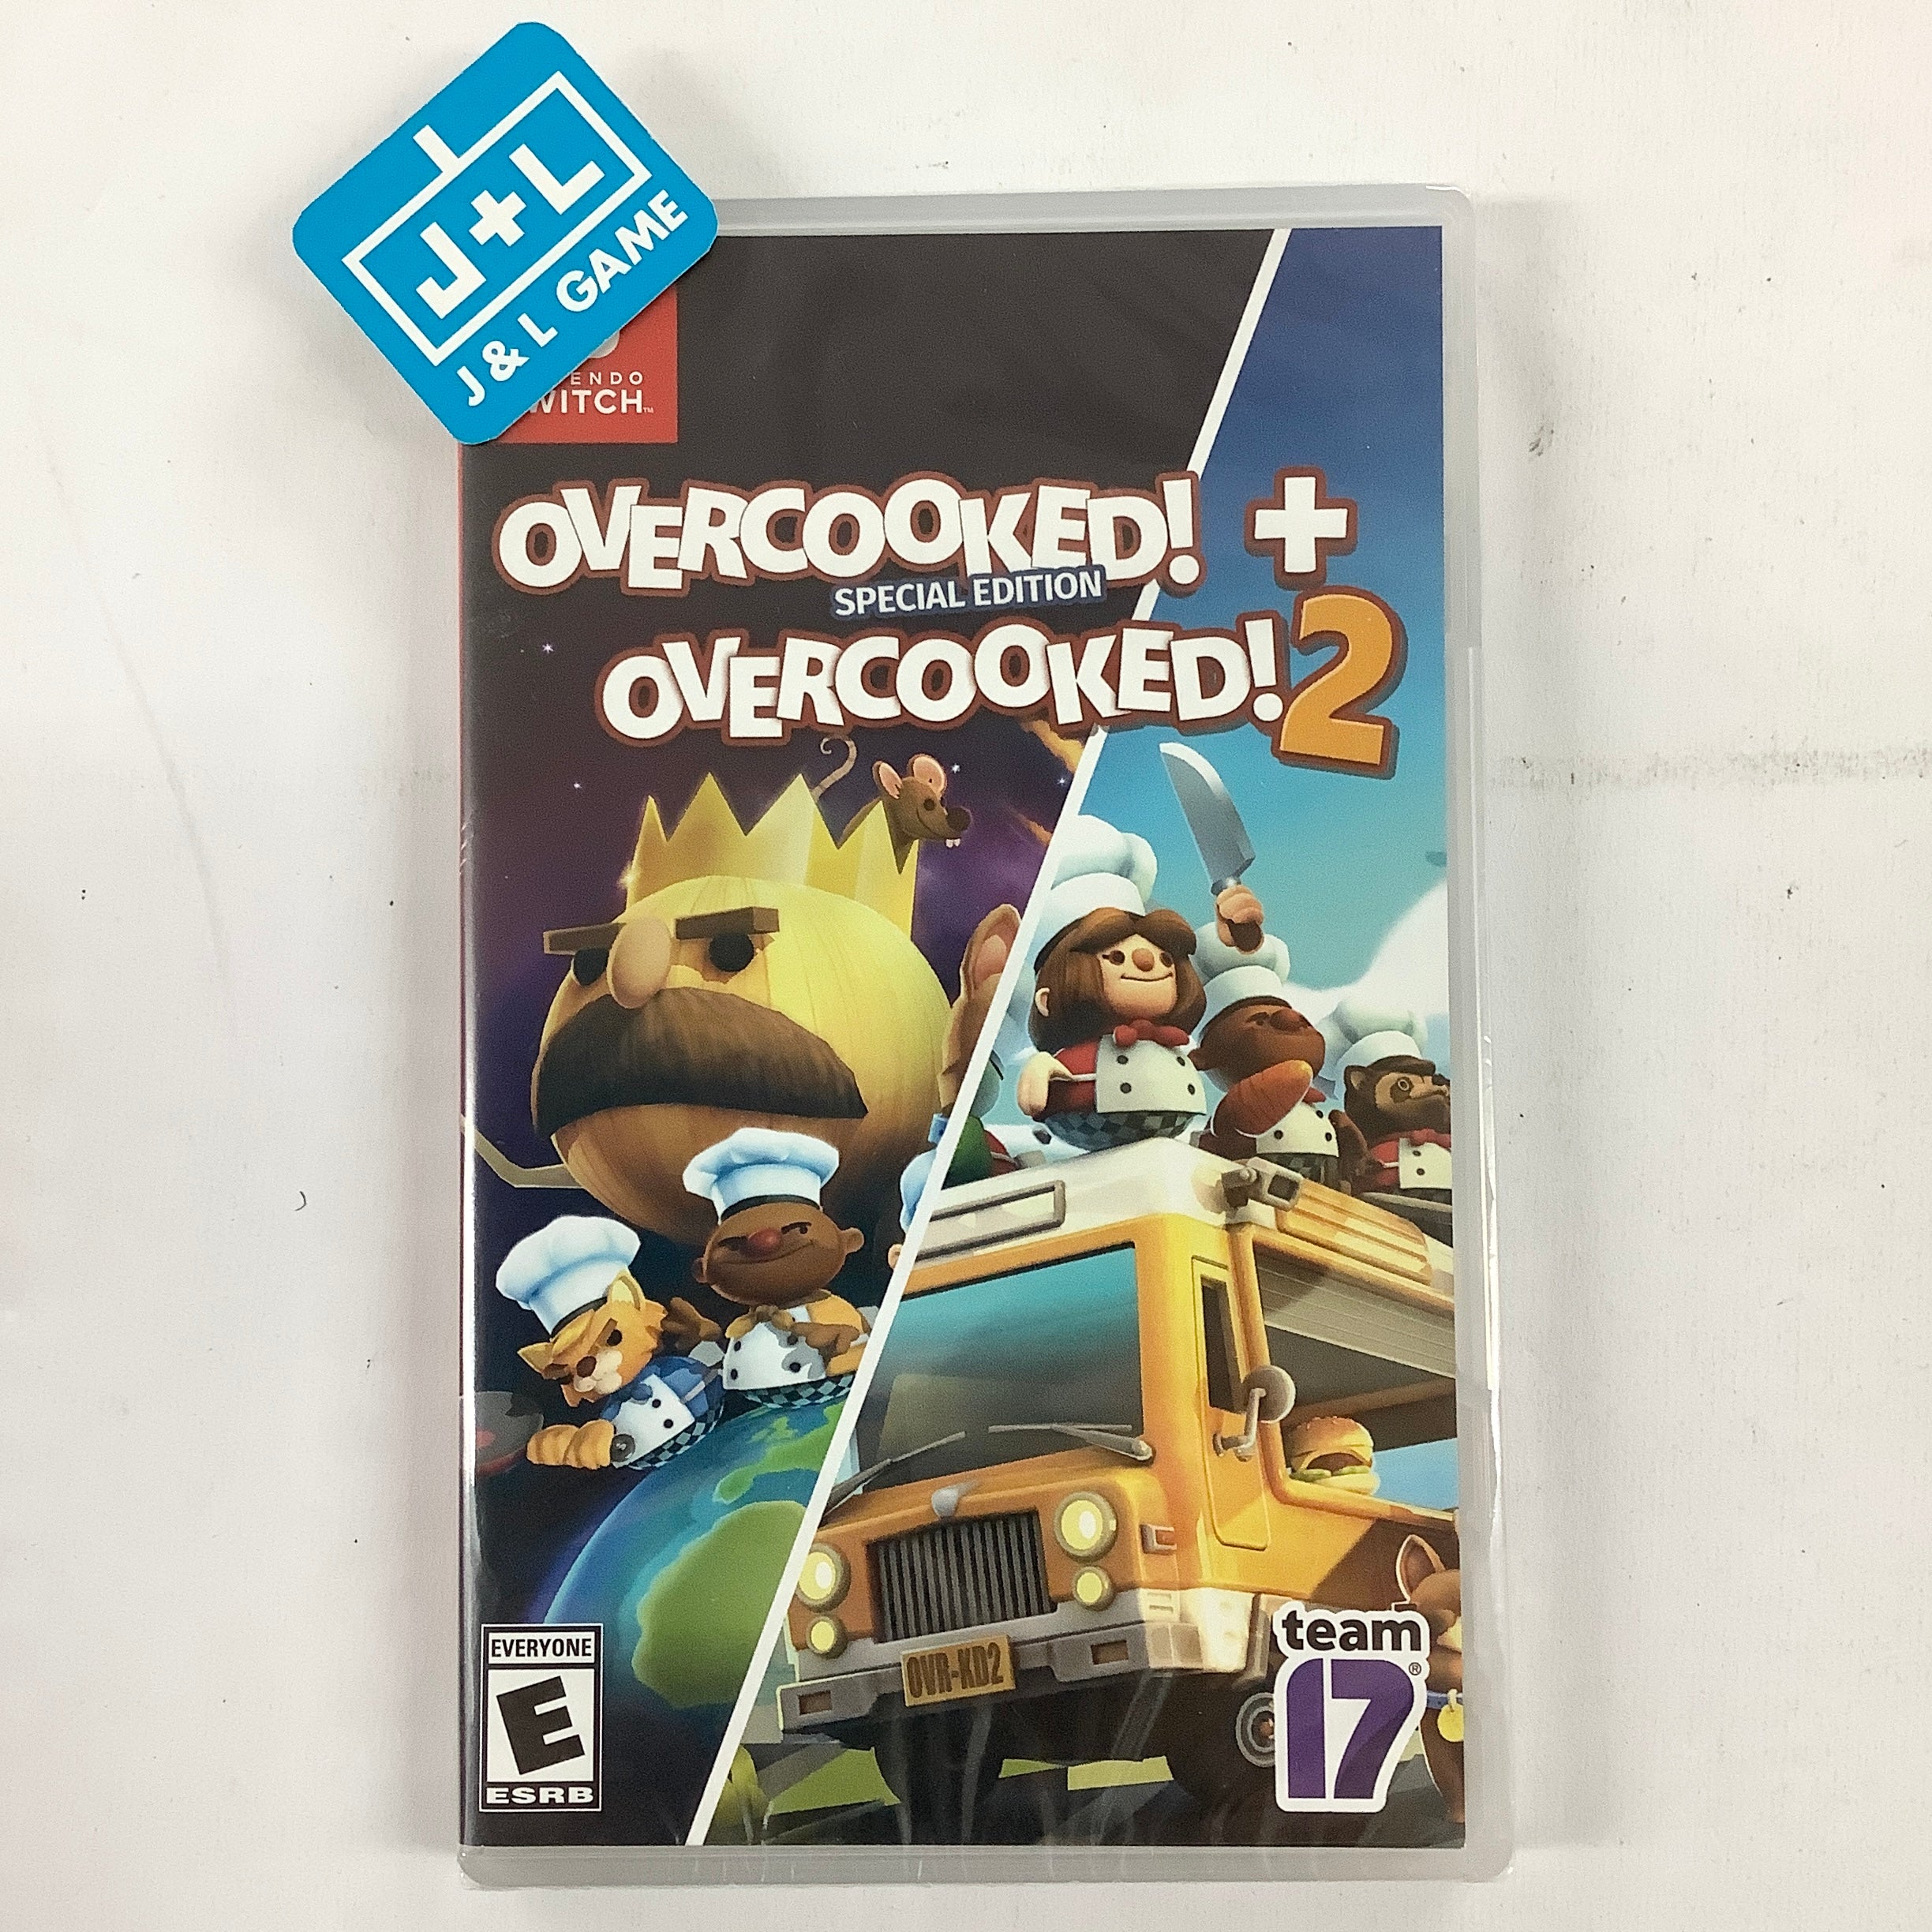 Overcooked! Special Edition + Overcooked! 2 - (NSW) Nintendo Switch Video Games Team 17   